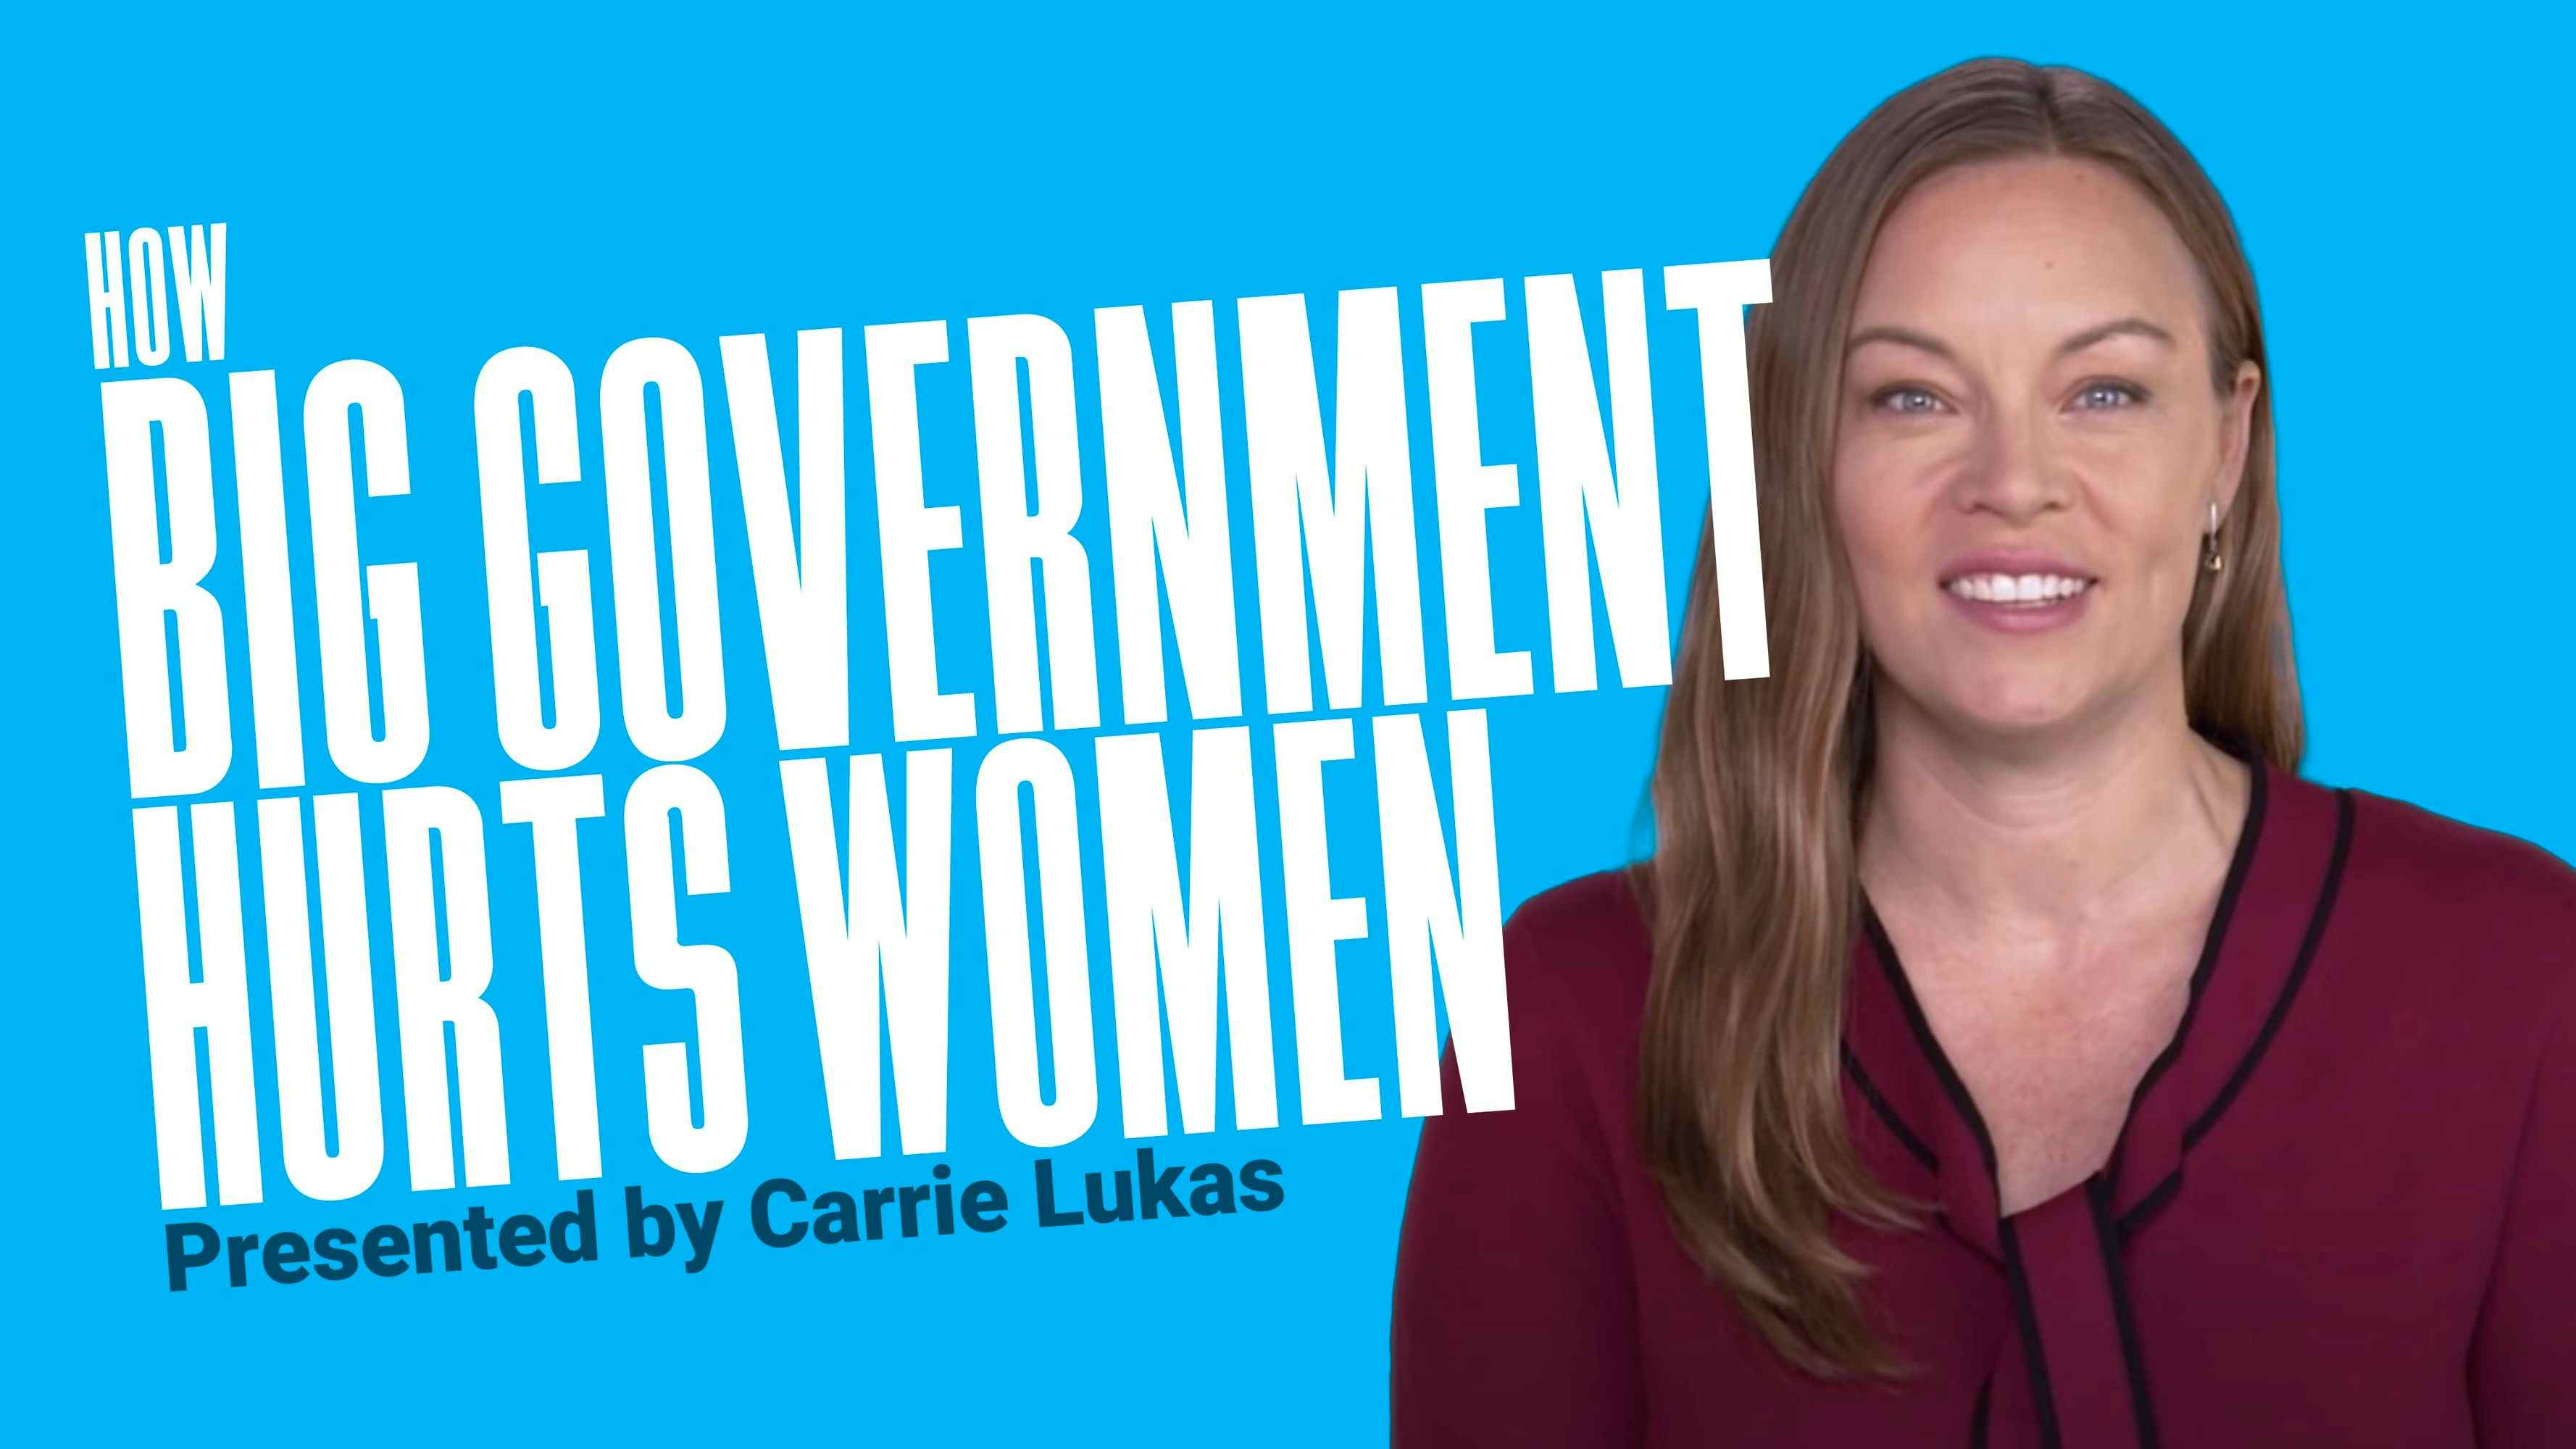 How Big Government Hurts Women